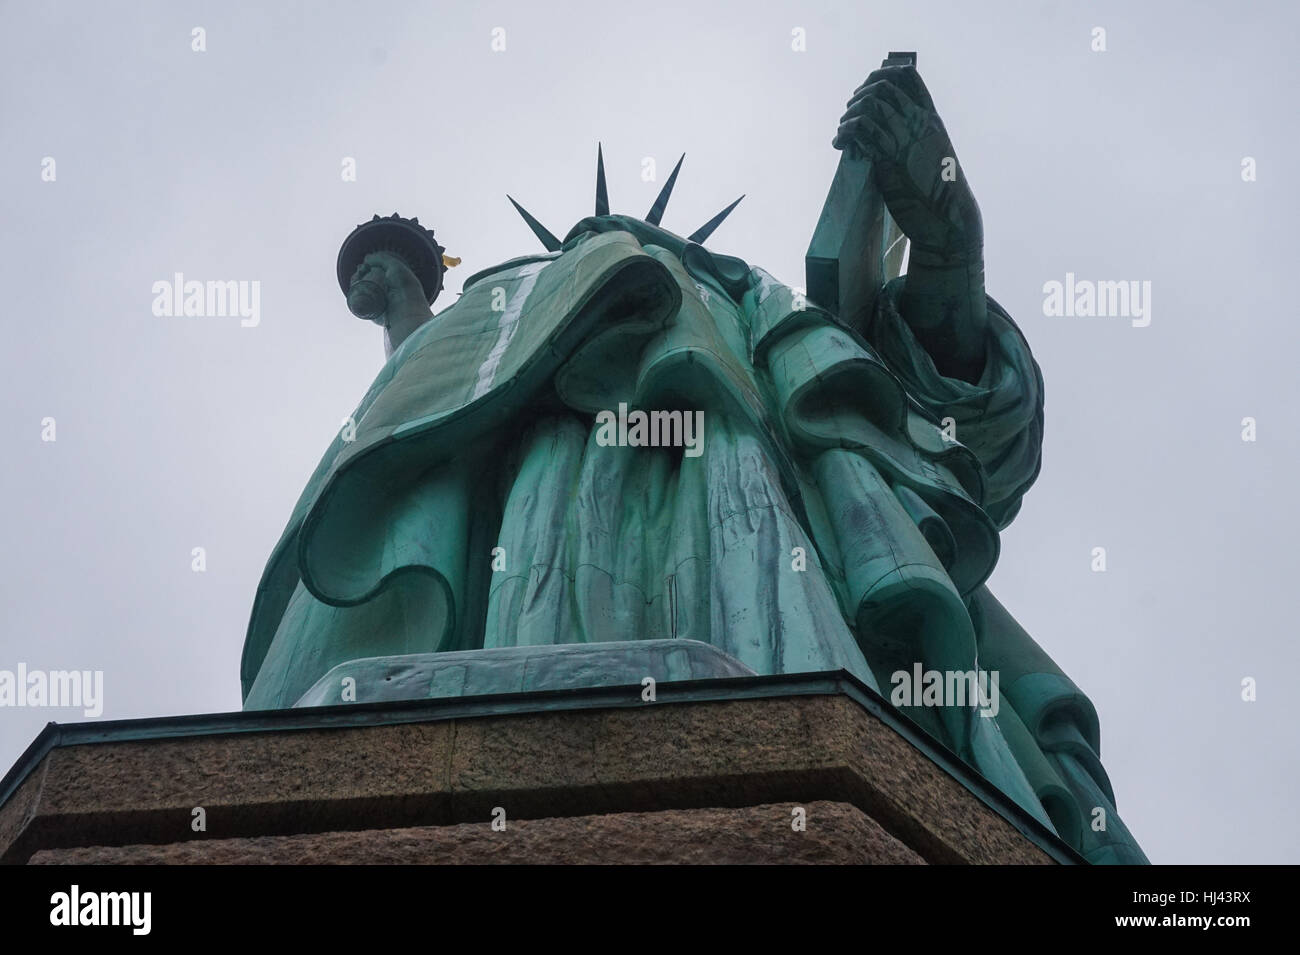 View of the Statue of Liberty from the pedestal, Liberty Island, New York Stock Photo